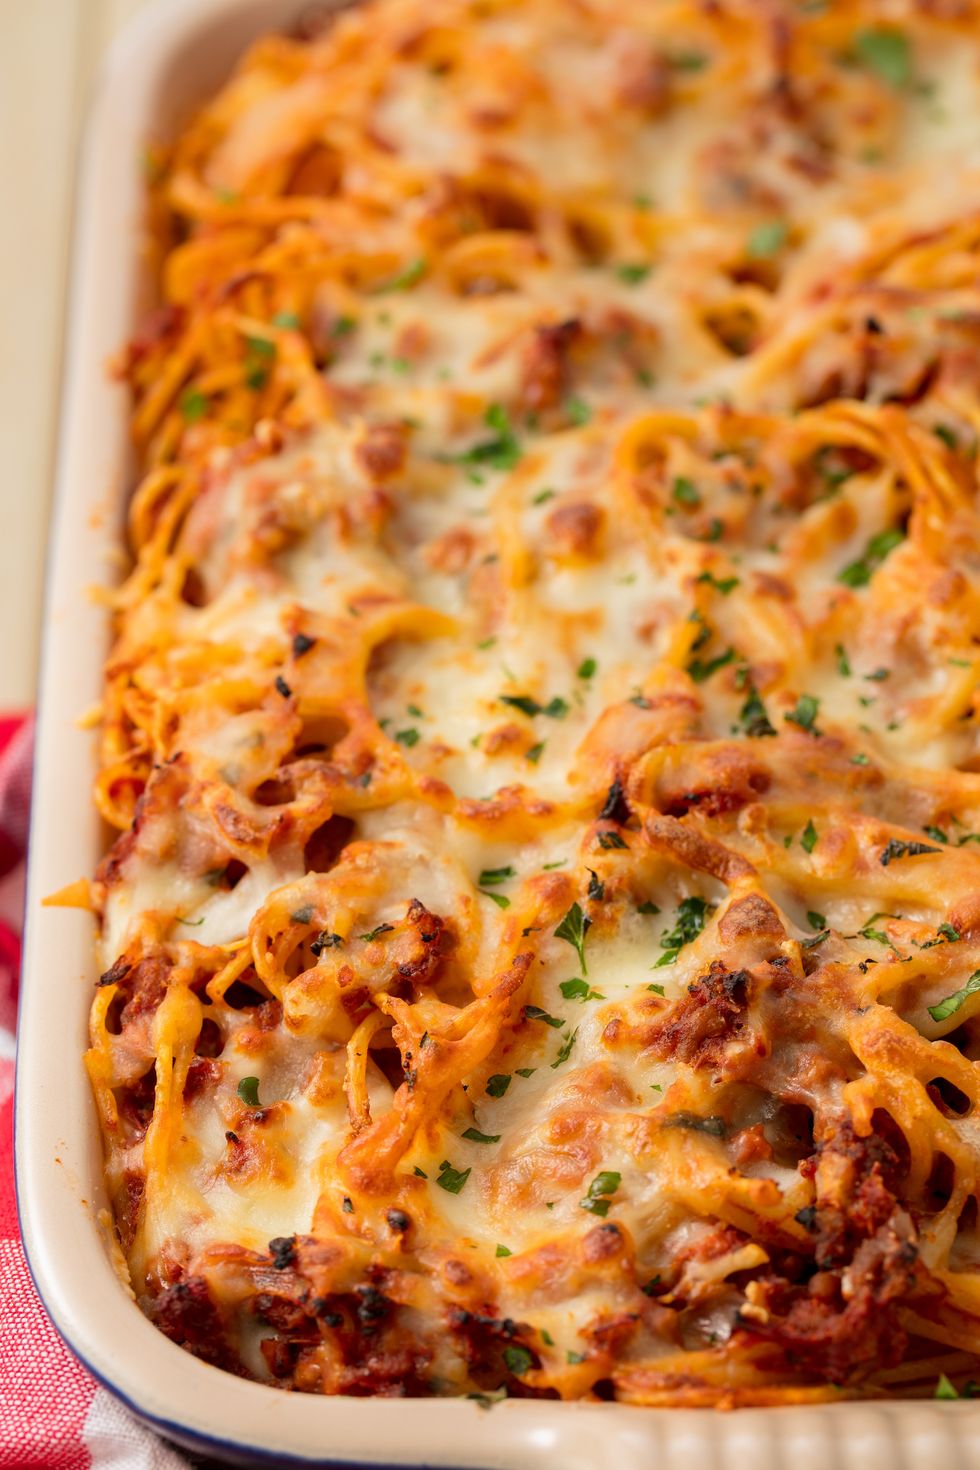 40 Best Baked Pasta Recipes - Easy Baked Pasta Dishes To Make